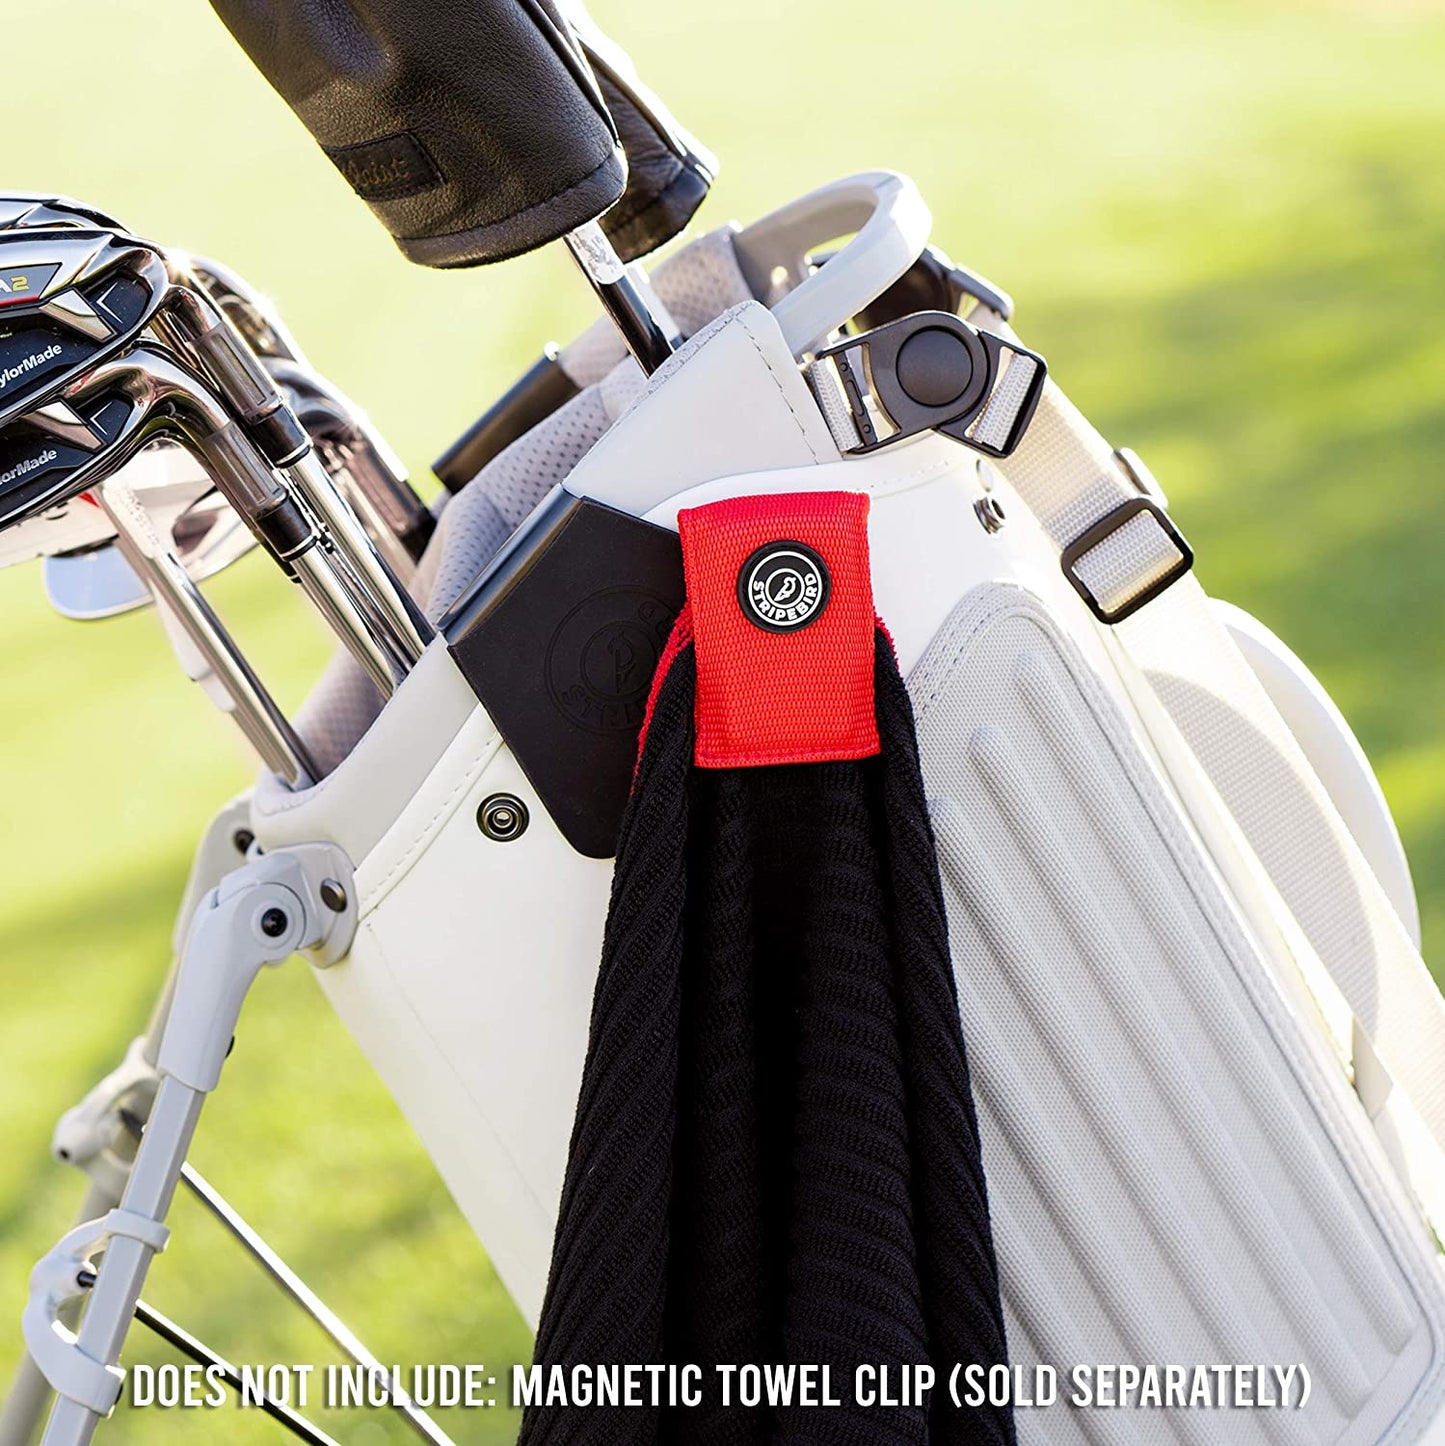 - Golf Hub for Magnetic Accessories - Golf Bag Attachment for Magnetic Products - Easily Access Magnetic Golf Accessories from Your Golf Bag…